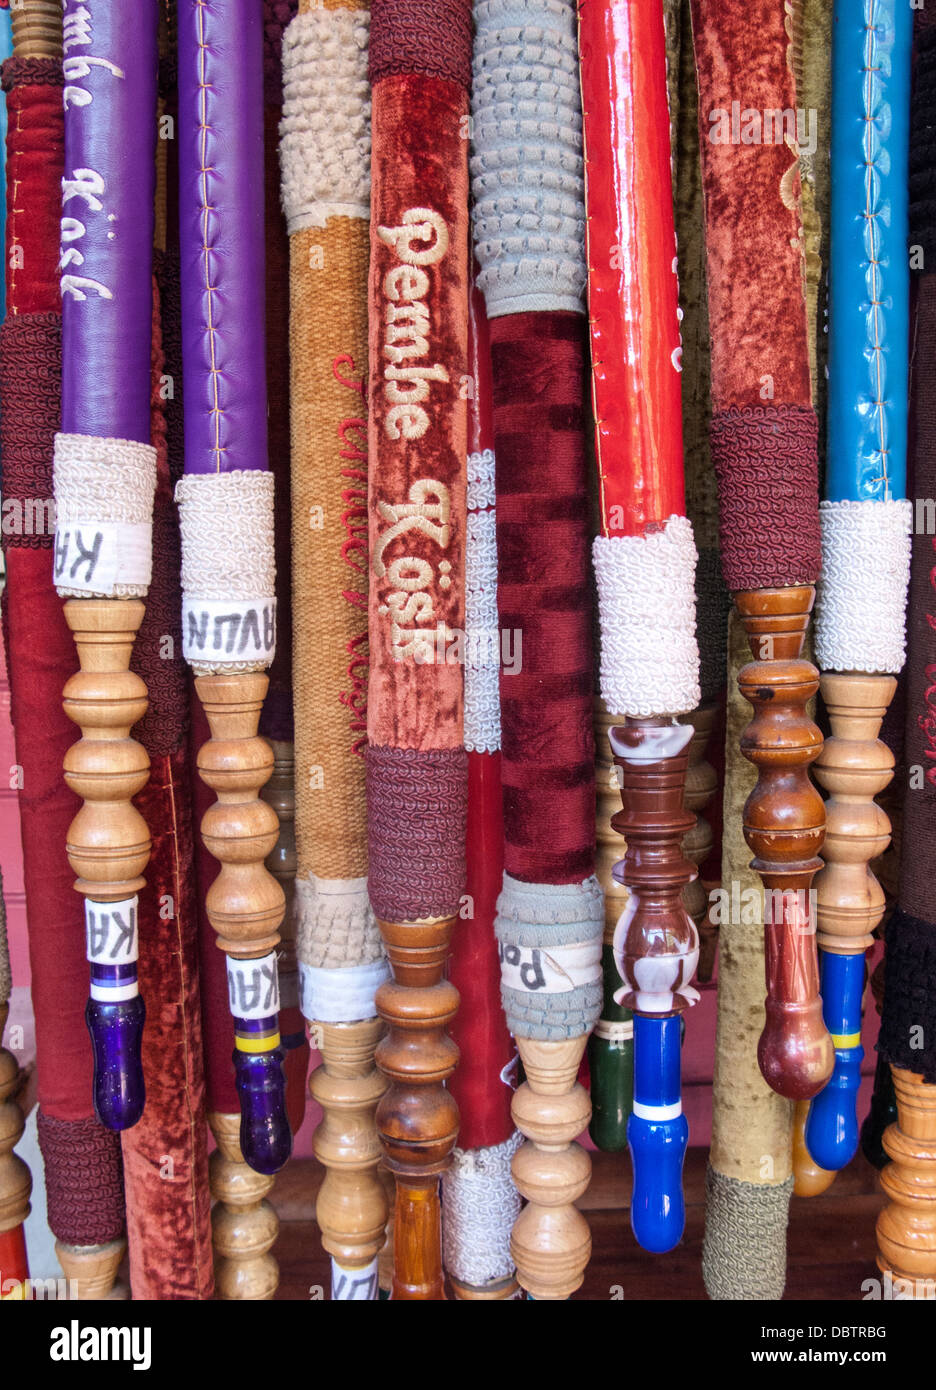 Nargile Pipes for sale, Chora, Istanbul, Turkey Stock Photo